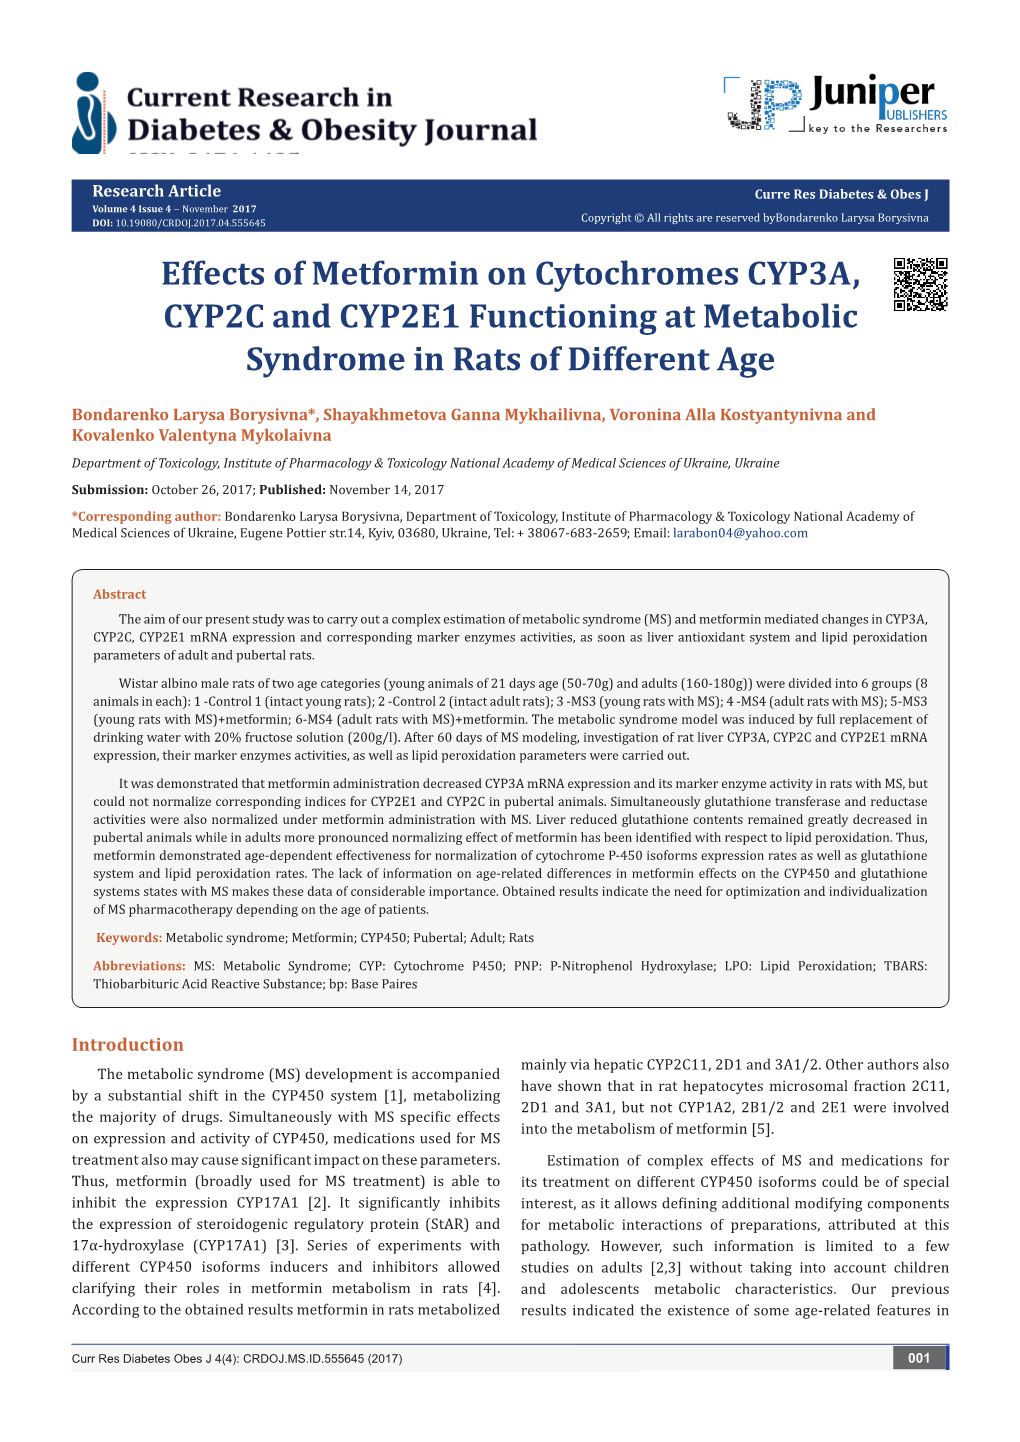 Effects of Metformin on Cytochromes CYP3А, CYP2С and CYP2Е1 Functioning at Metabolic Syndrome in Rats of Different Age